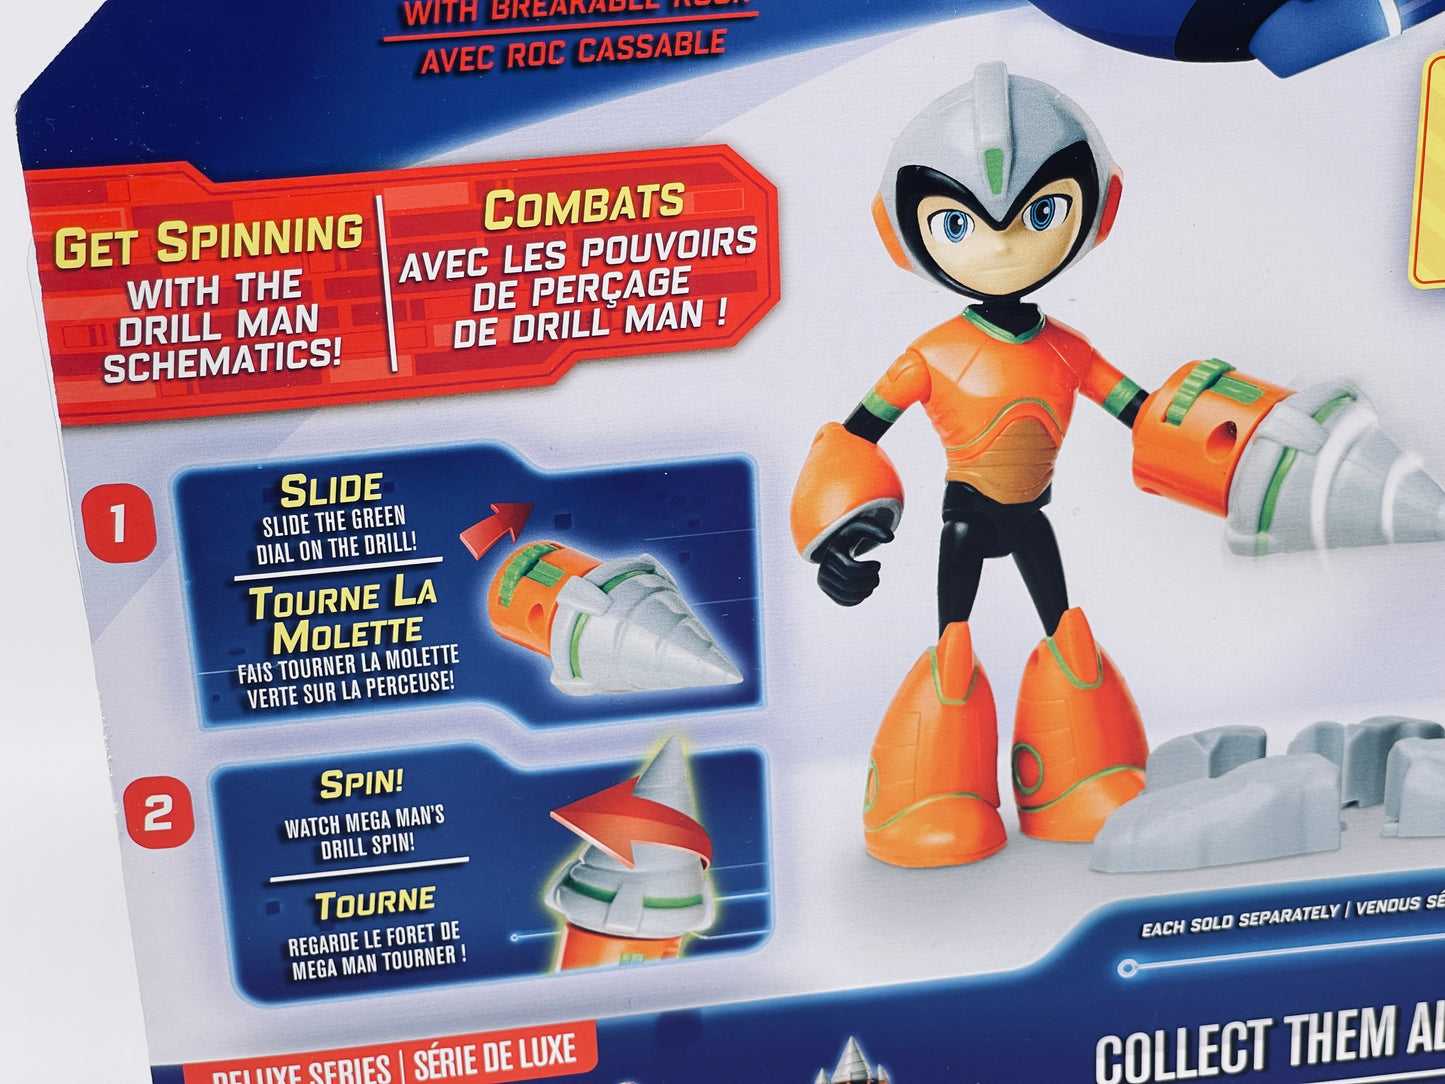 Mega Man - Fully Charged Deluxe Series "Spin Drill + Stein" (Jakks)